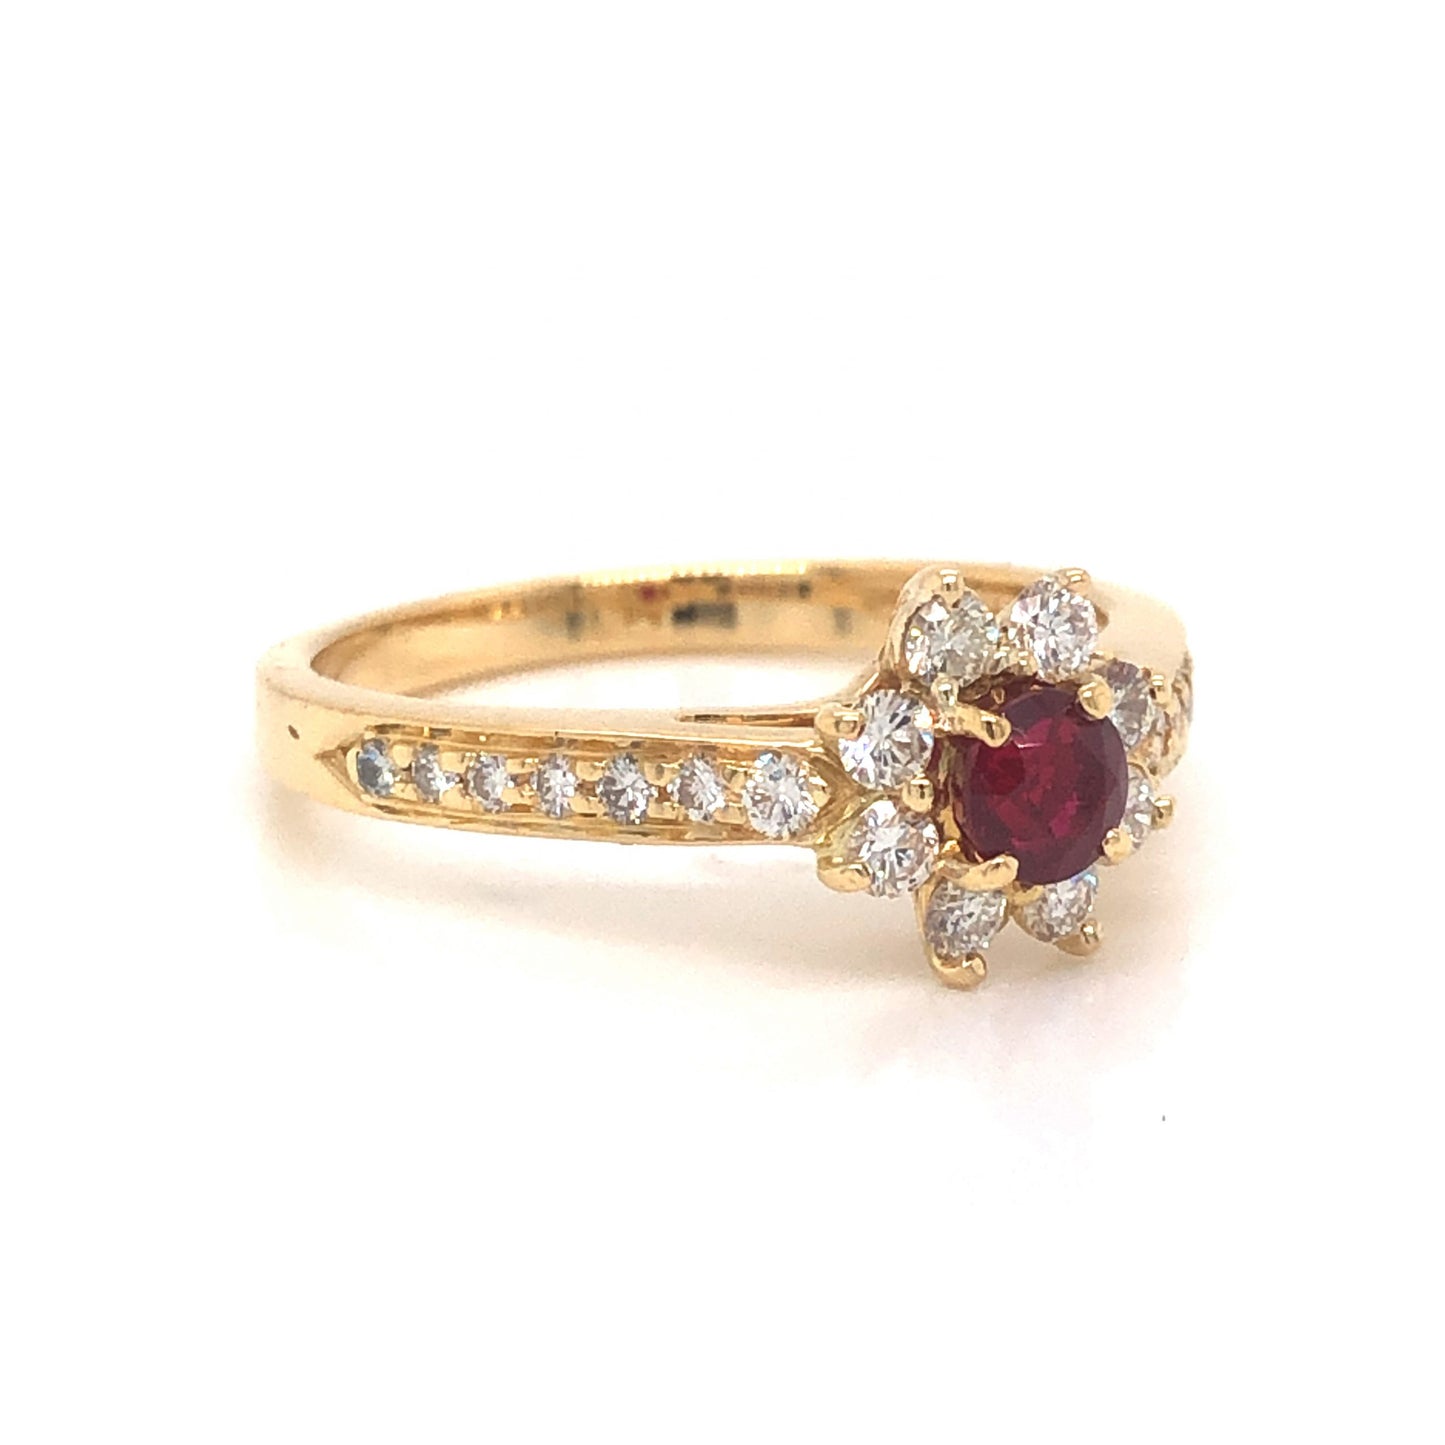 Tiffany and Co. Ruby & Diamond Engagement Ring in 18k Yellow Gold